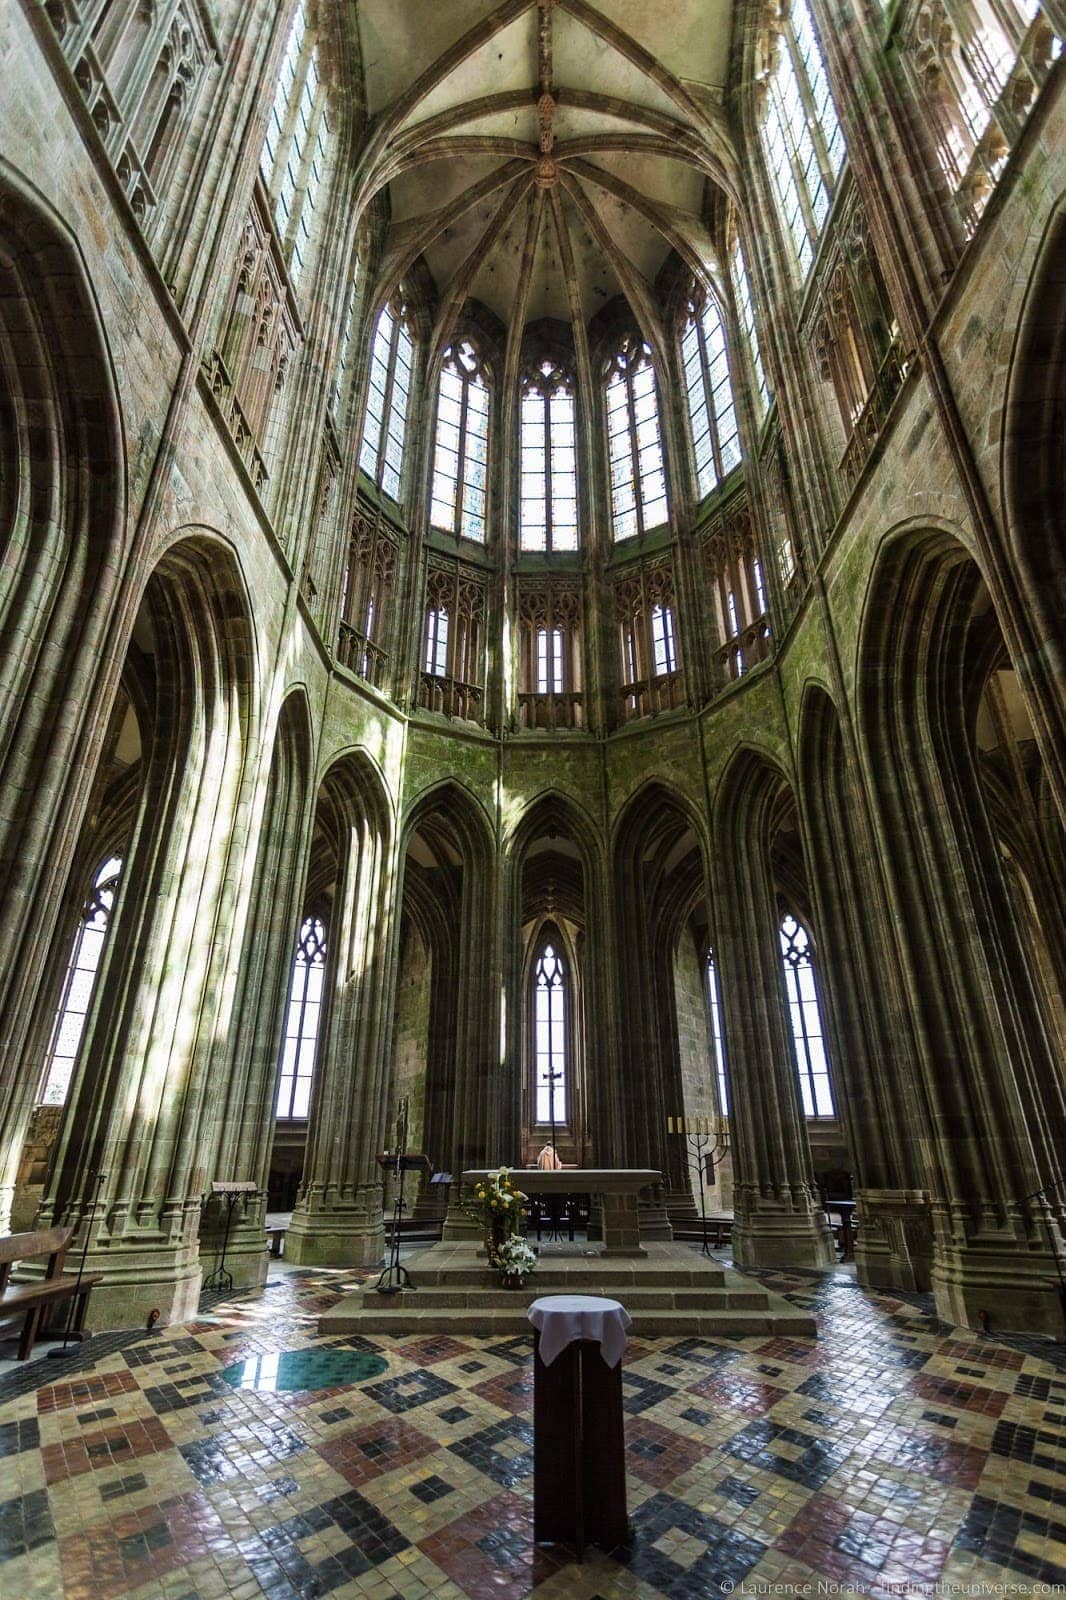 2 Days in Normandy - Interior Mont St Michel Abbey